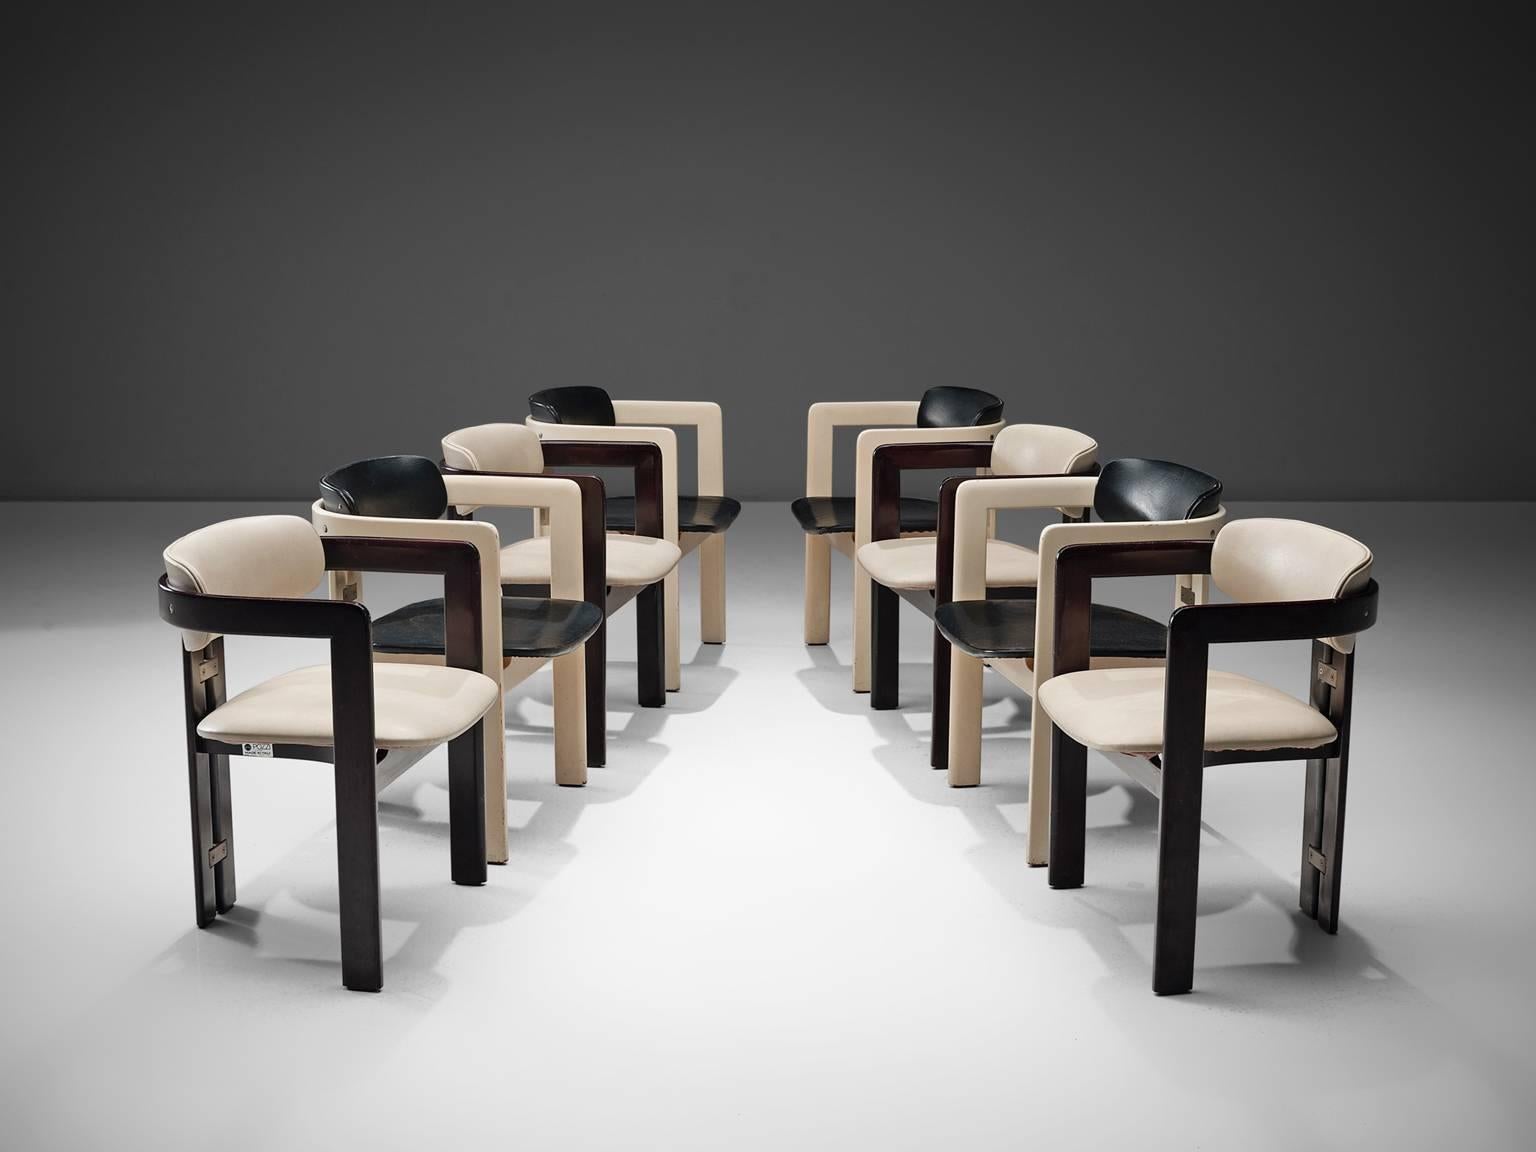 Augusto Savini for Pozzi, set of eight 'Pamplona' dining room chairs, white and black leatherette, ash wood and metal, Italy, 1965. 

Set of eight armchairs in ash wood and white and black leatherette upholstery. The chairs have a unique and